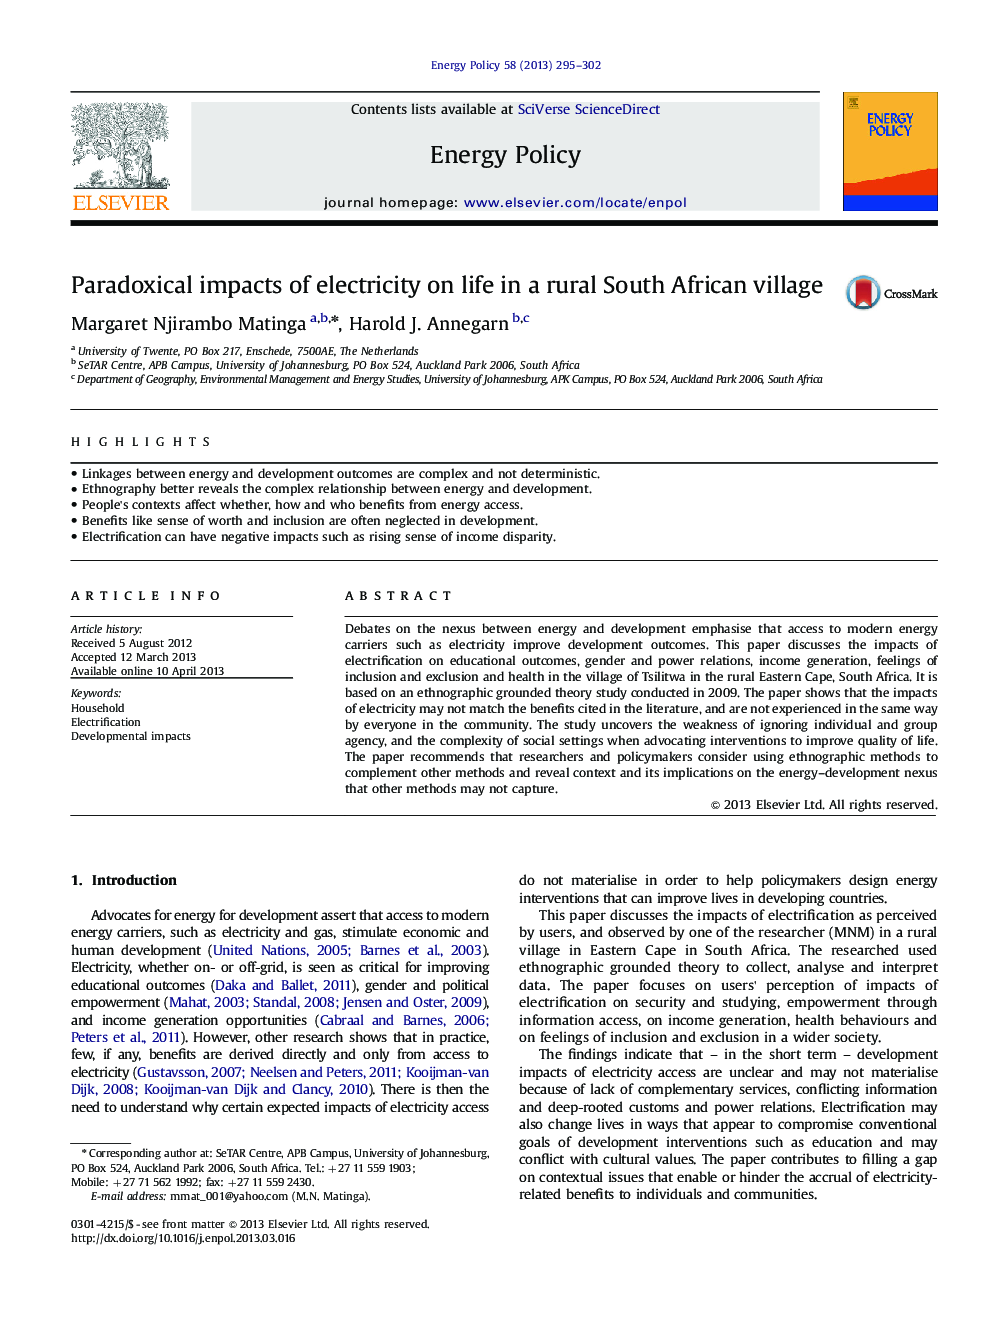 Paradoxical impacts of electricity on life in a rural South African village